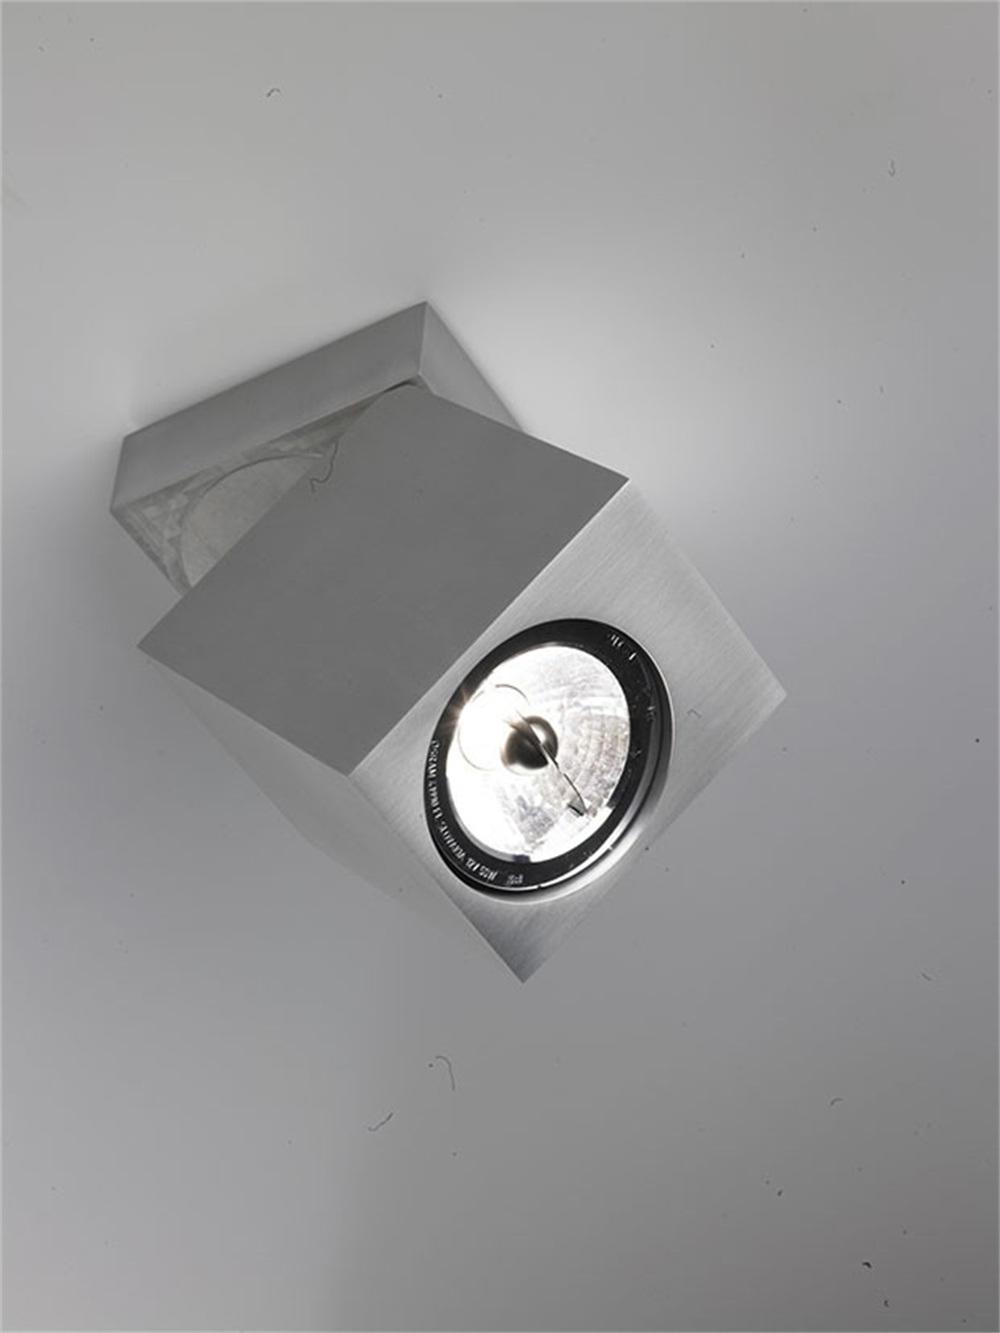 Orientable Ultra Thin Design Showroom Light Surface Mounted LED Downlight